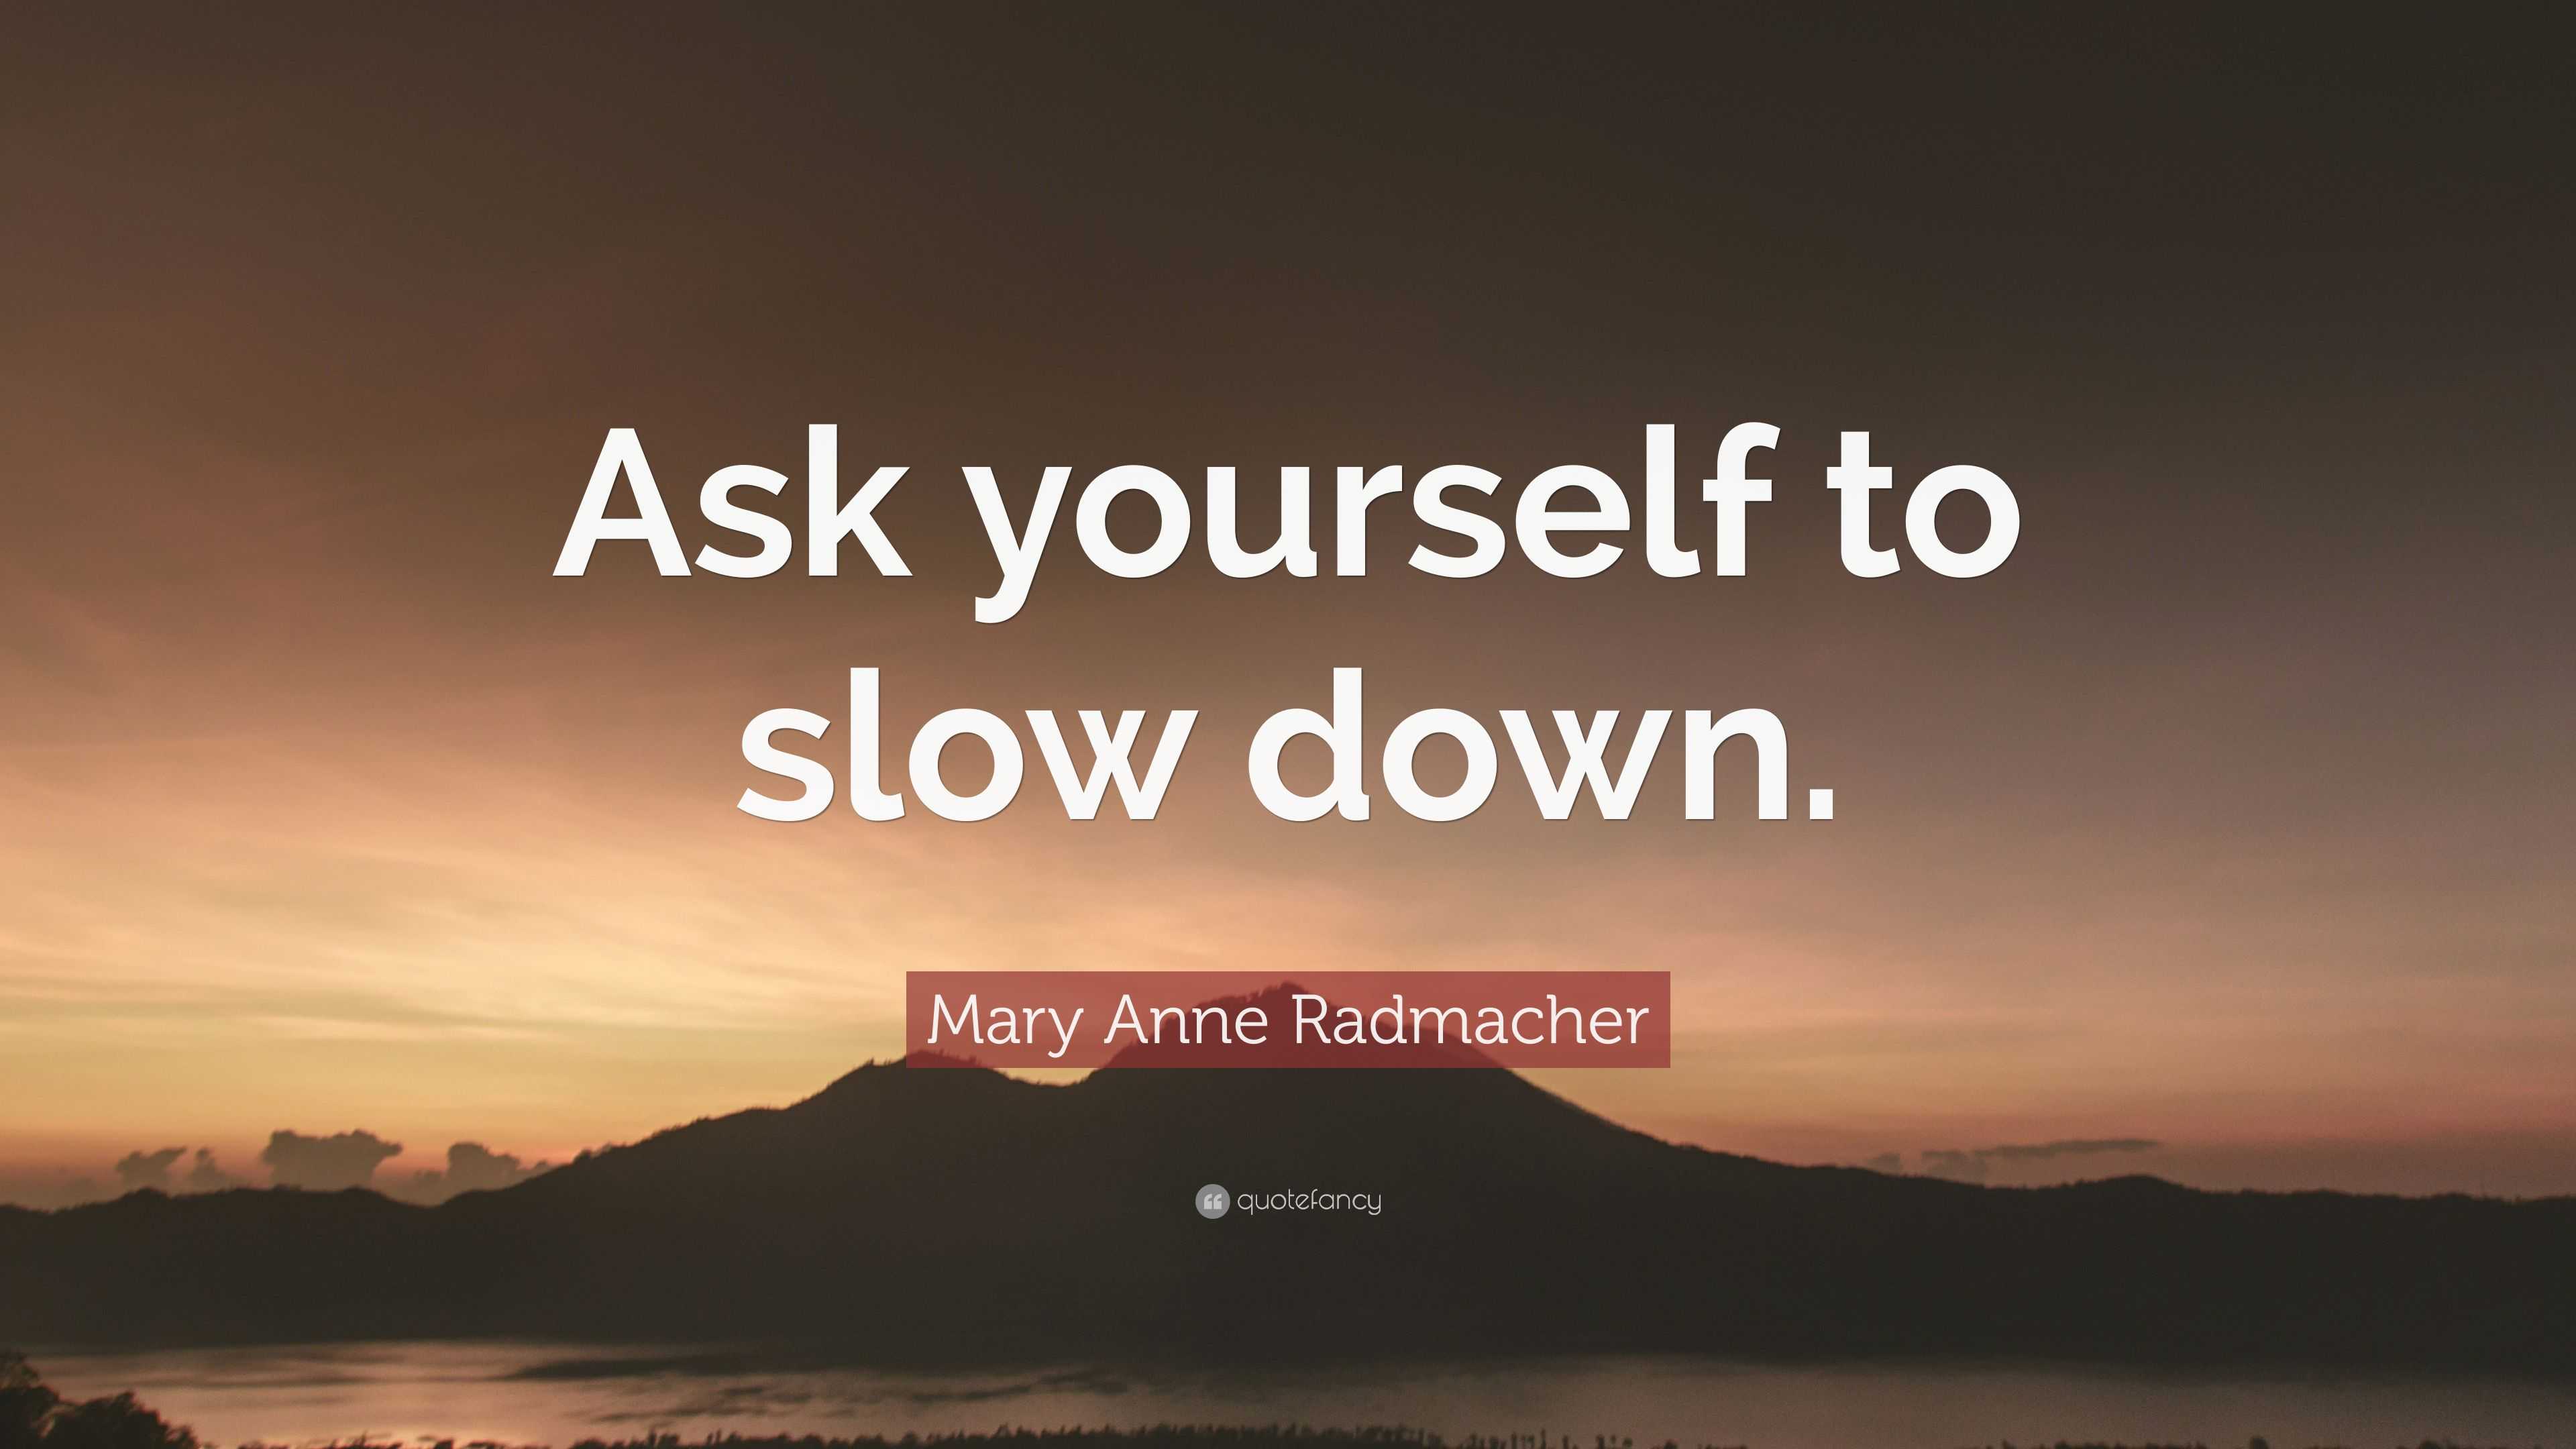 Mary Anne Radmacher Quote: "Ask yourself to slow down." (11 wallpapers) - Quotefancy